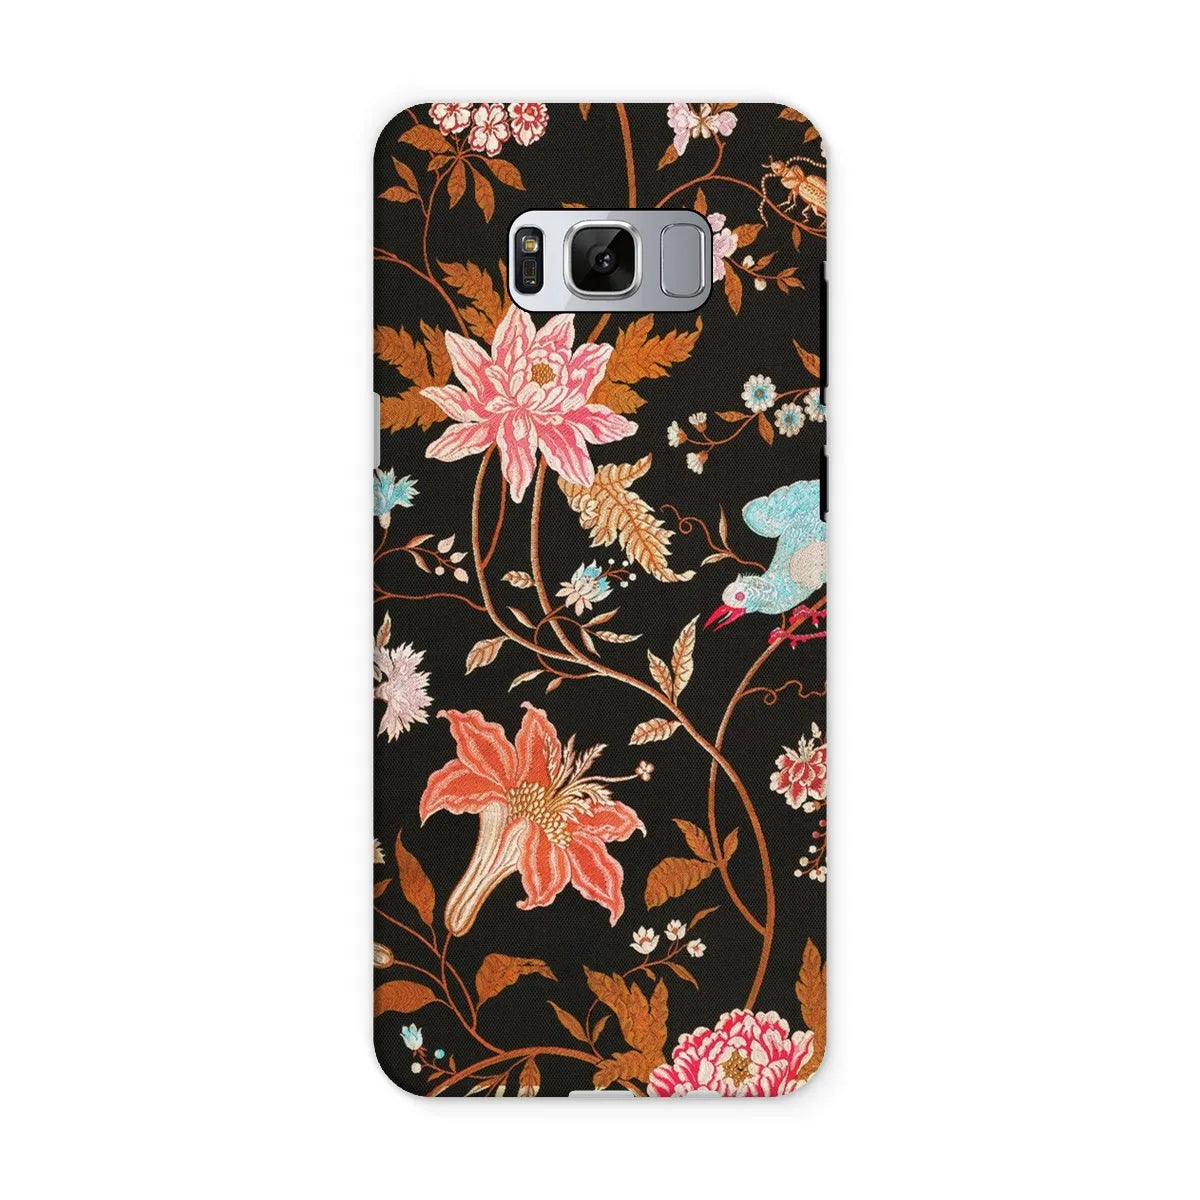 Midnight Call - Indian Aesthetic Fabric Art Phone Case - Samsung Galaxy S8 / Matte - Mobile Phone Cases - Aesthetic Art